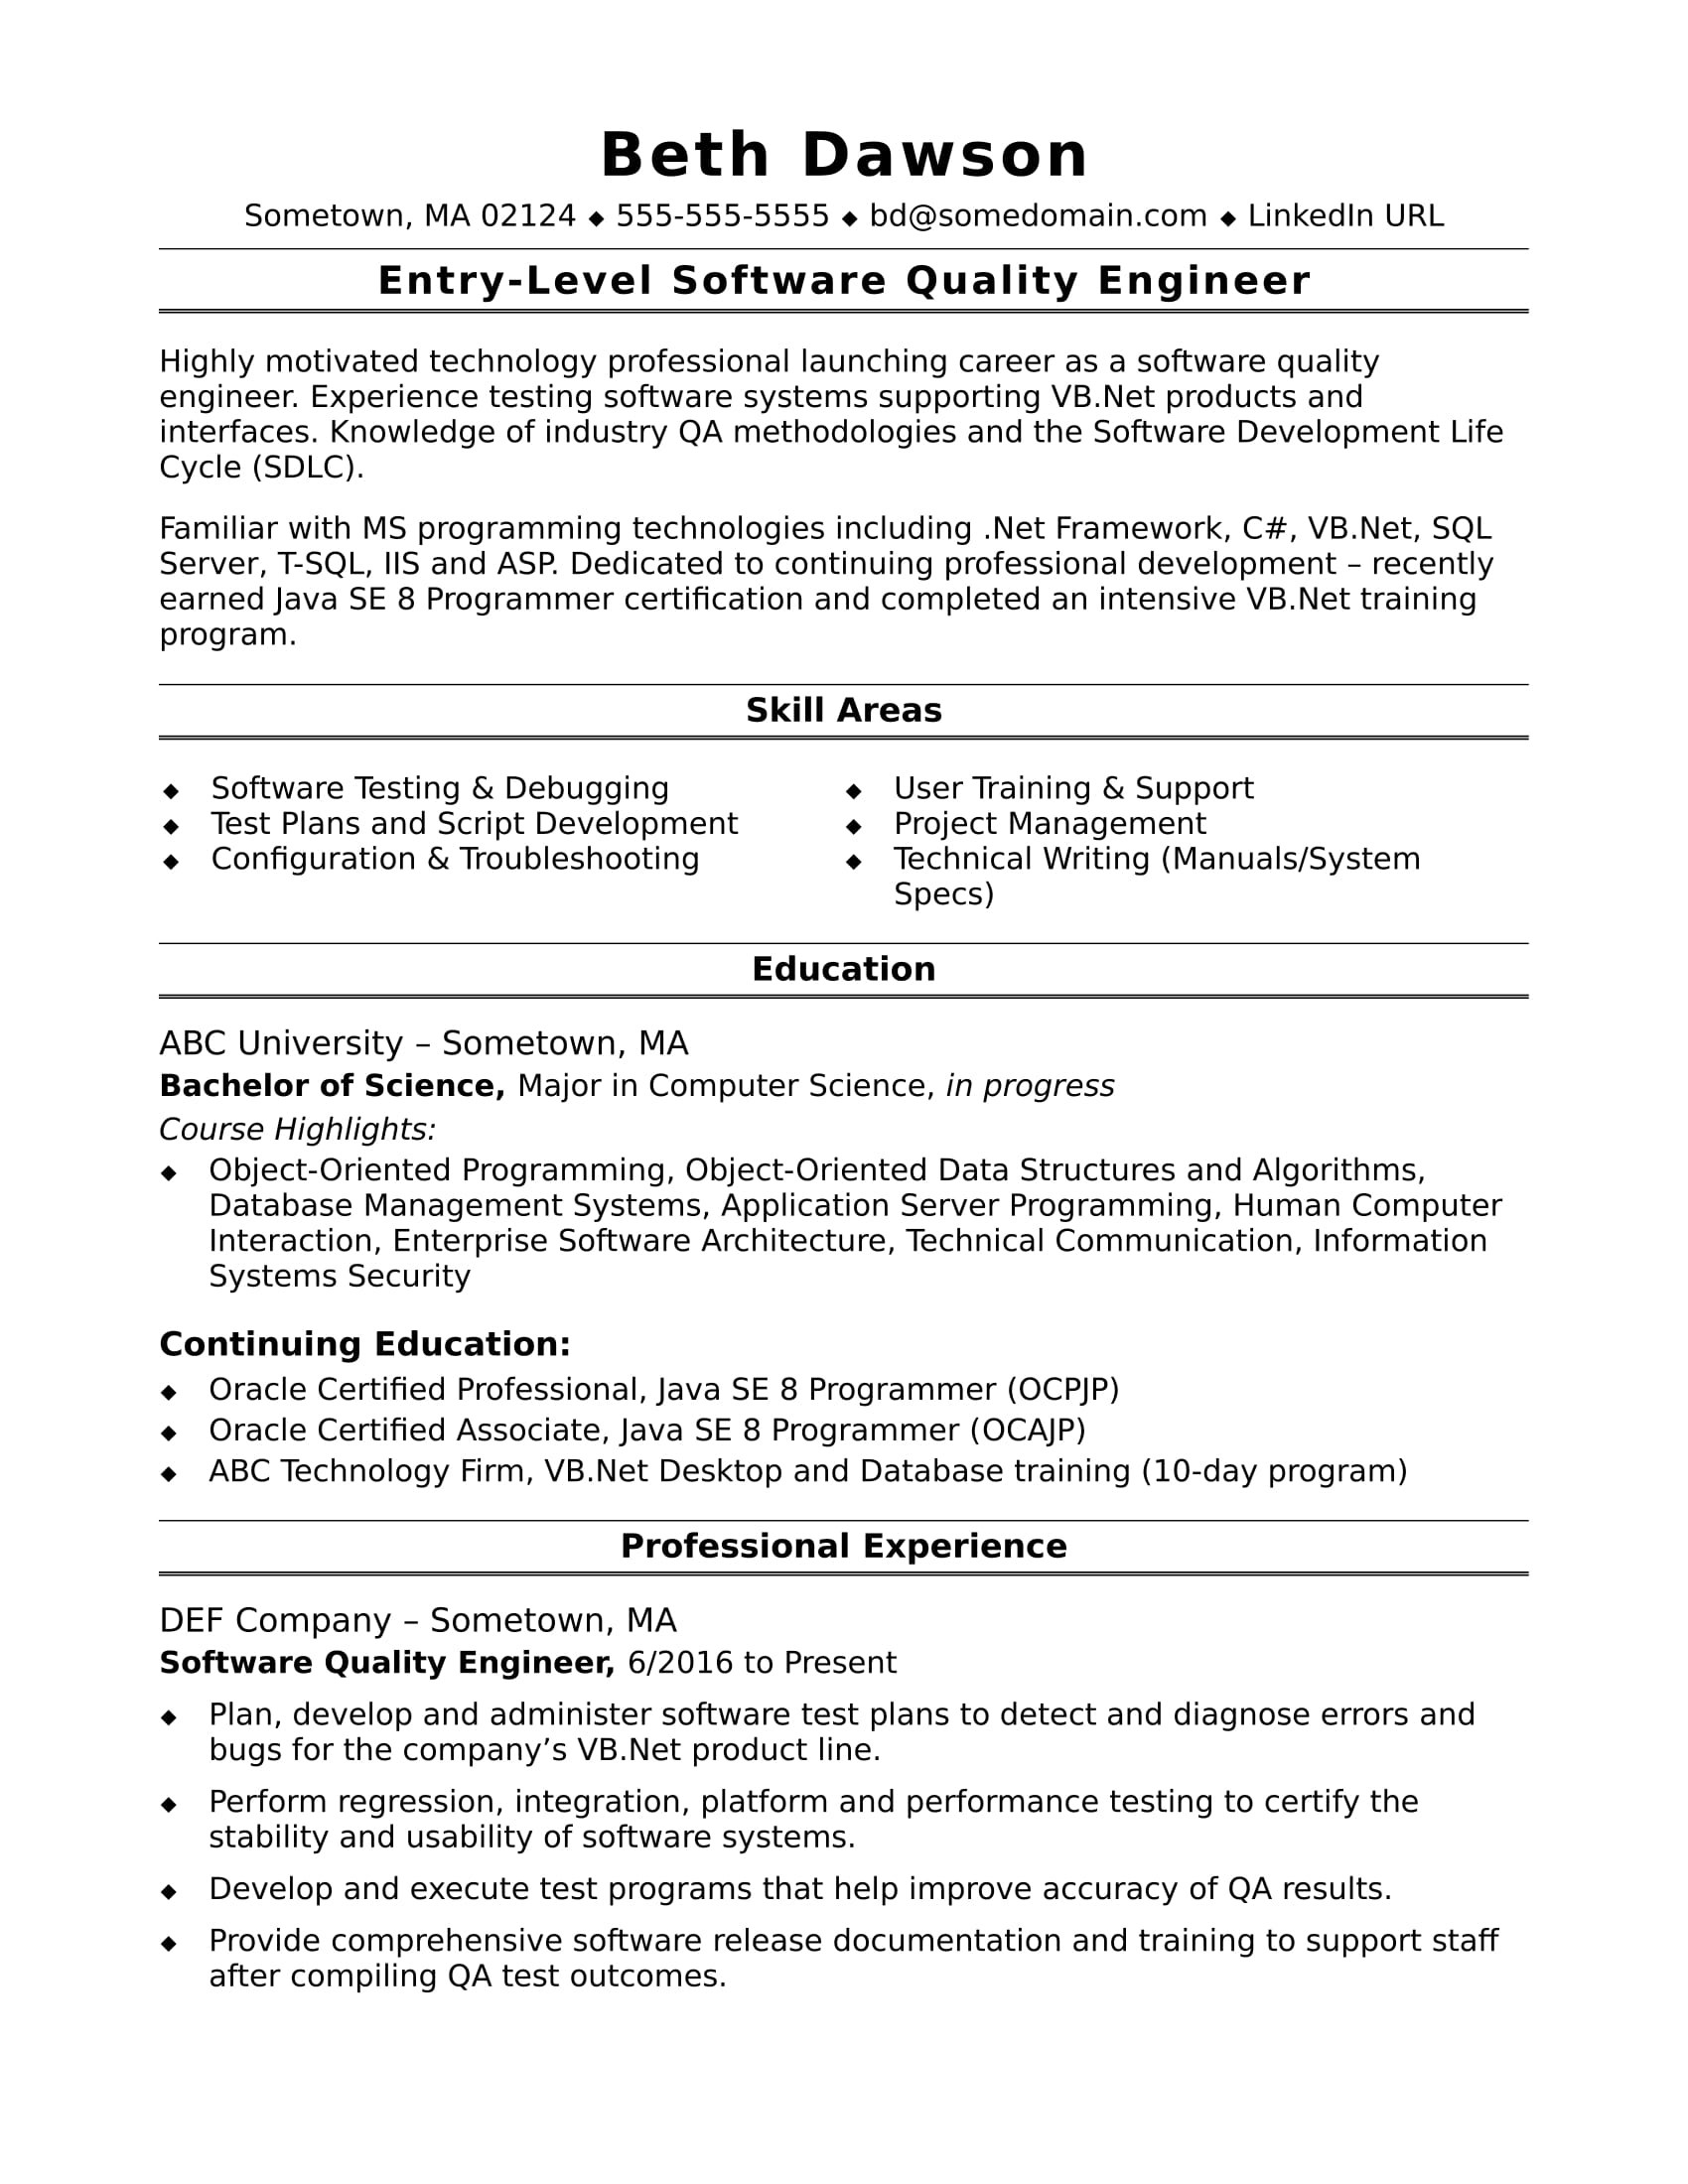 Quality assurance Engineer Resume Samples Sample Resume for An Entry Level Quality Engineer